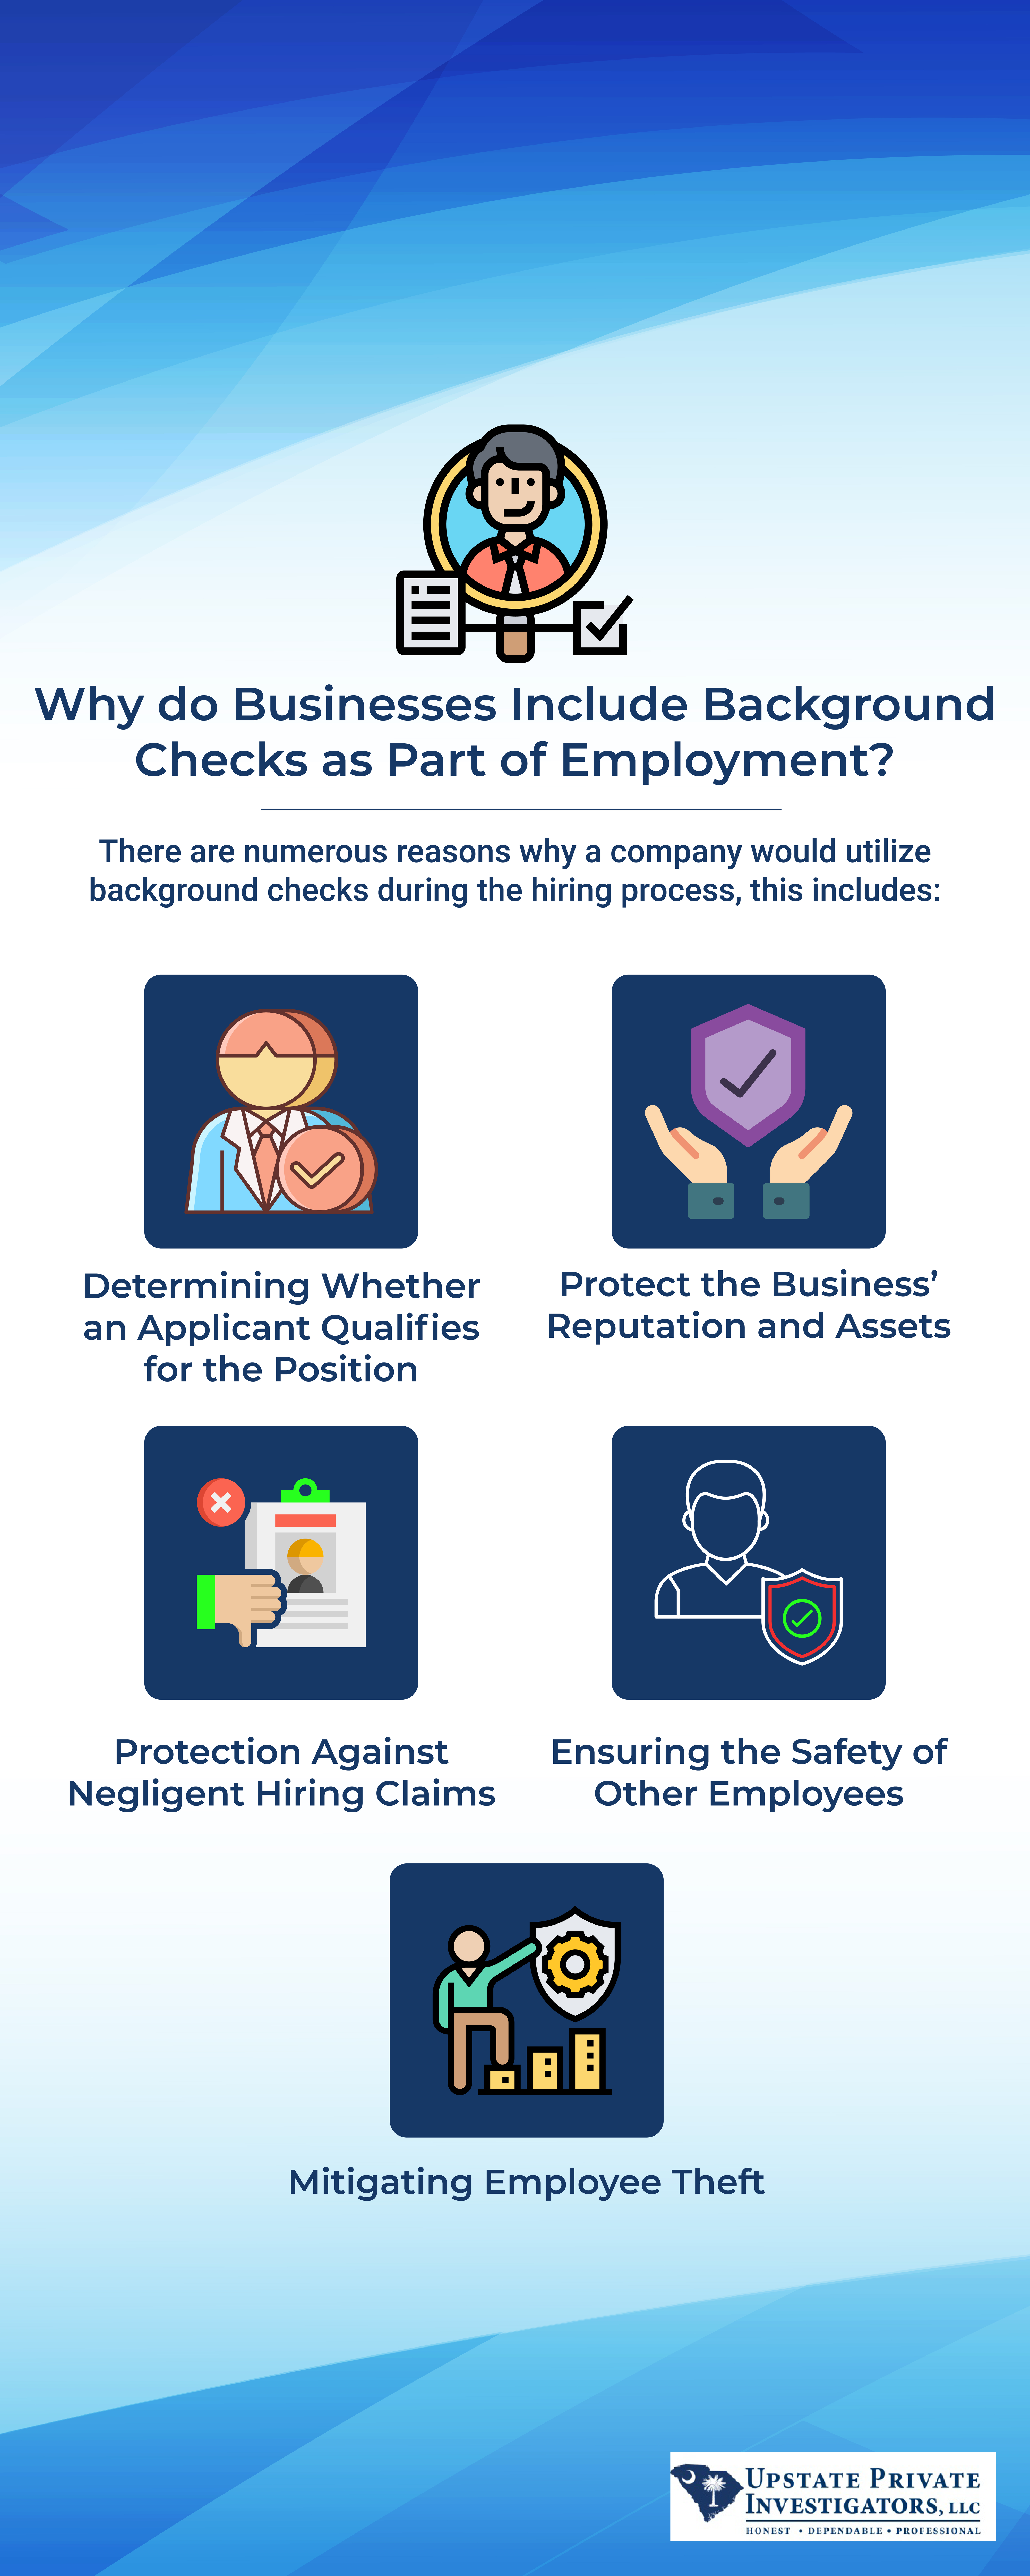 Anderson Employment Background Checks Infographic